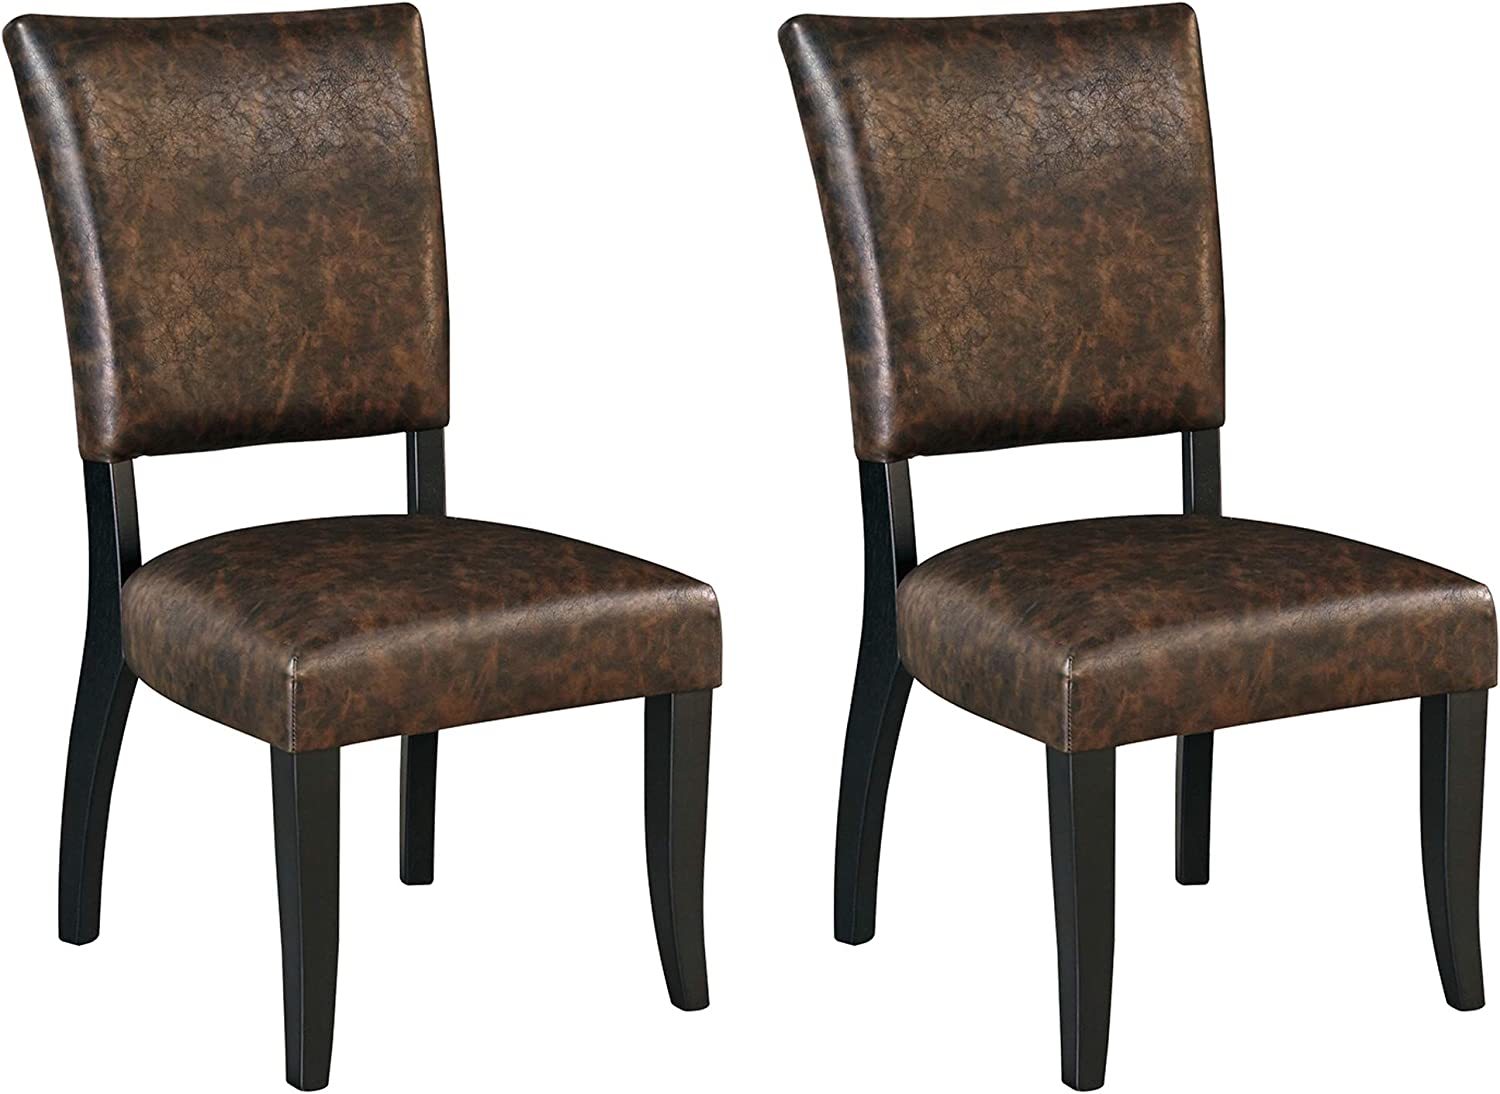 Primary image for Signature Design by Ashley Sommerford Urban Farmhouse Faux Leather, Dark Brown